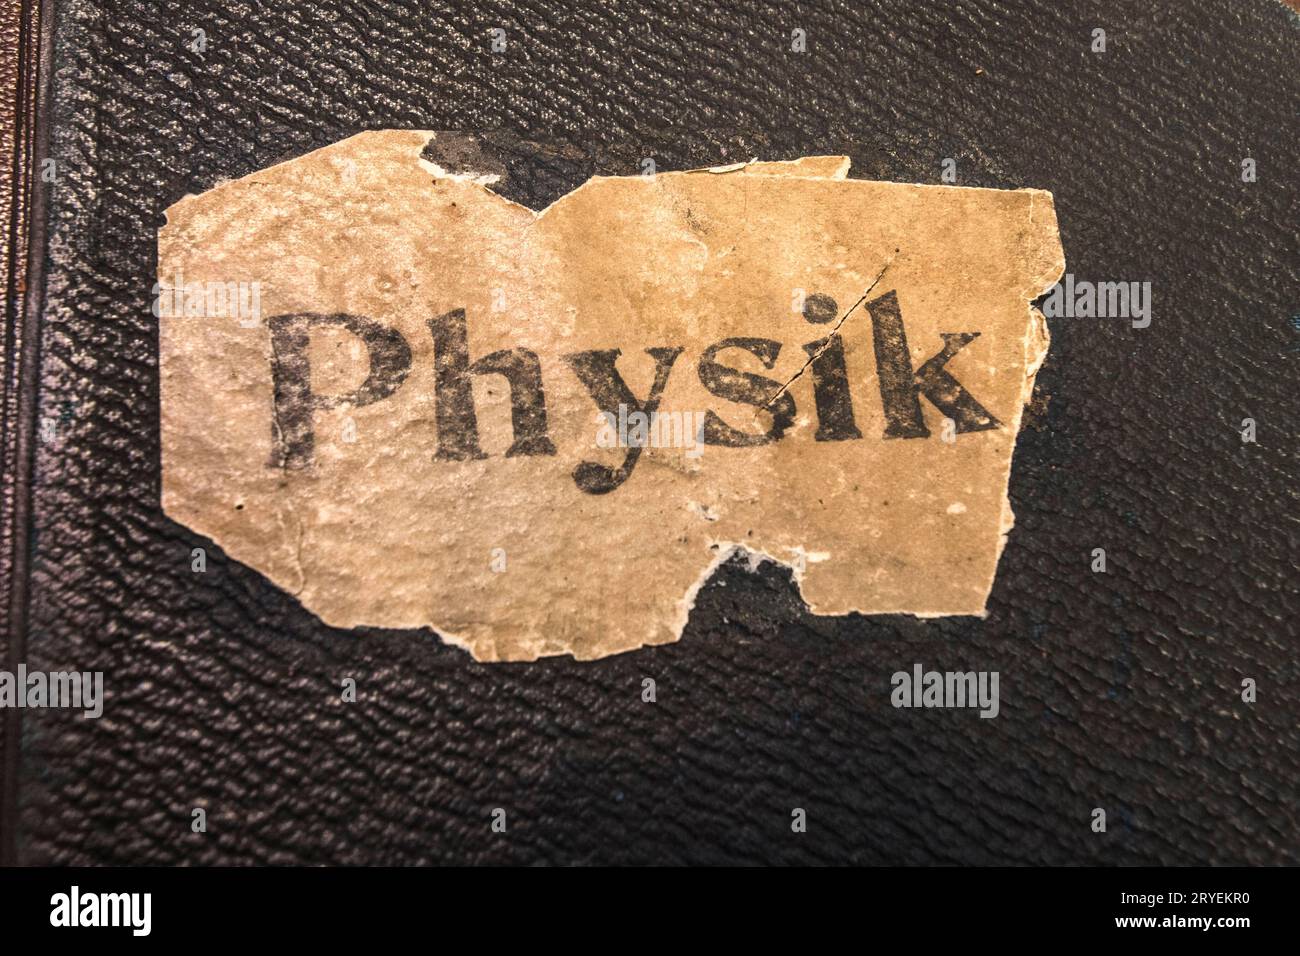 Book cover with word Physik (physics) Stock Photo